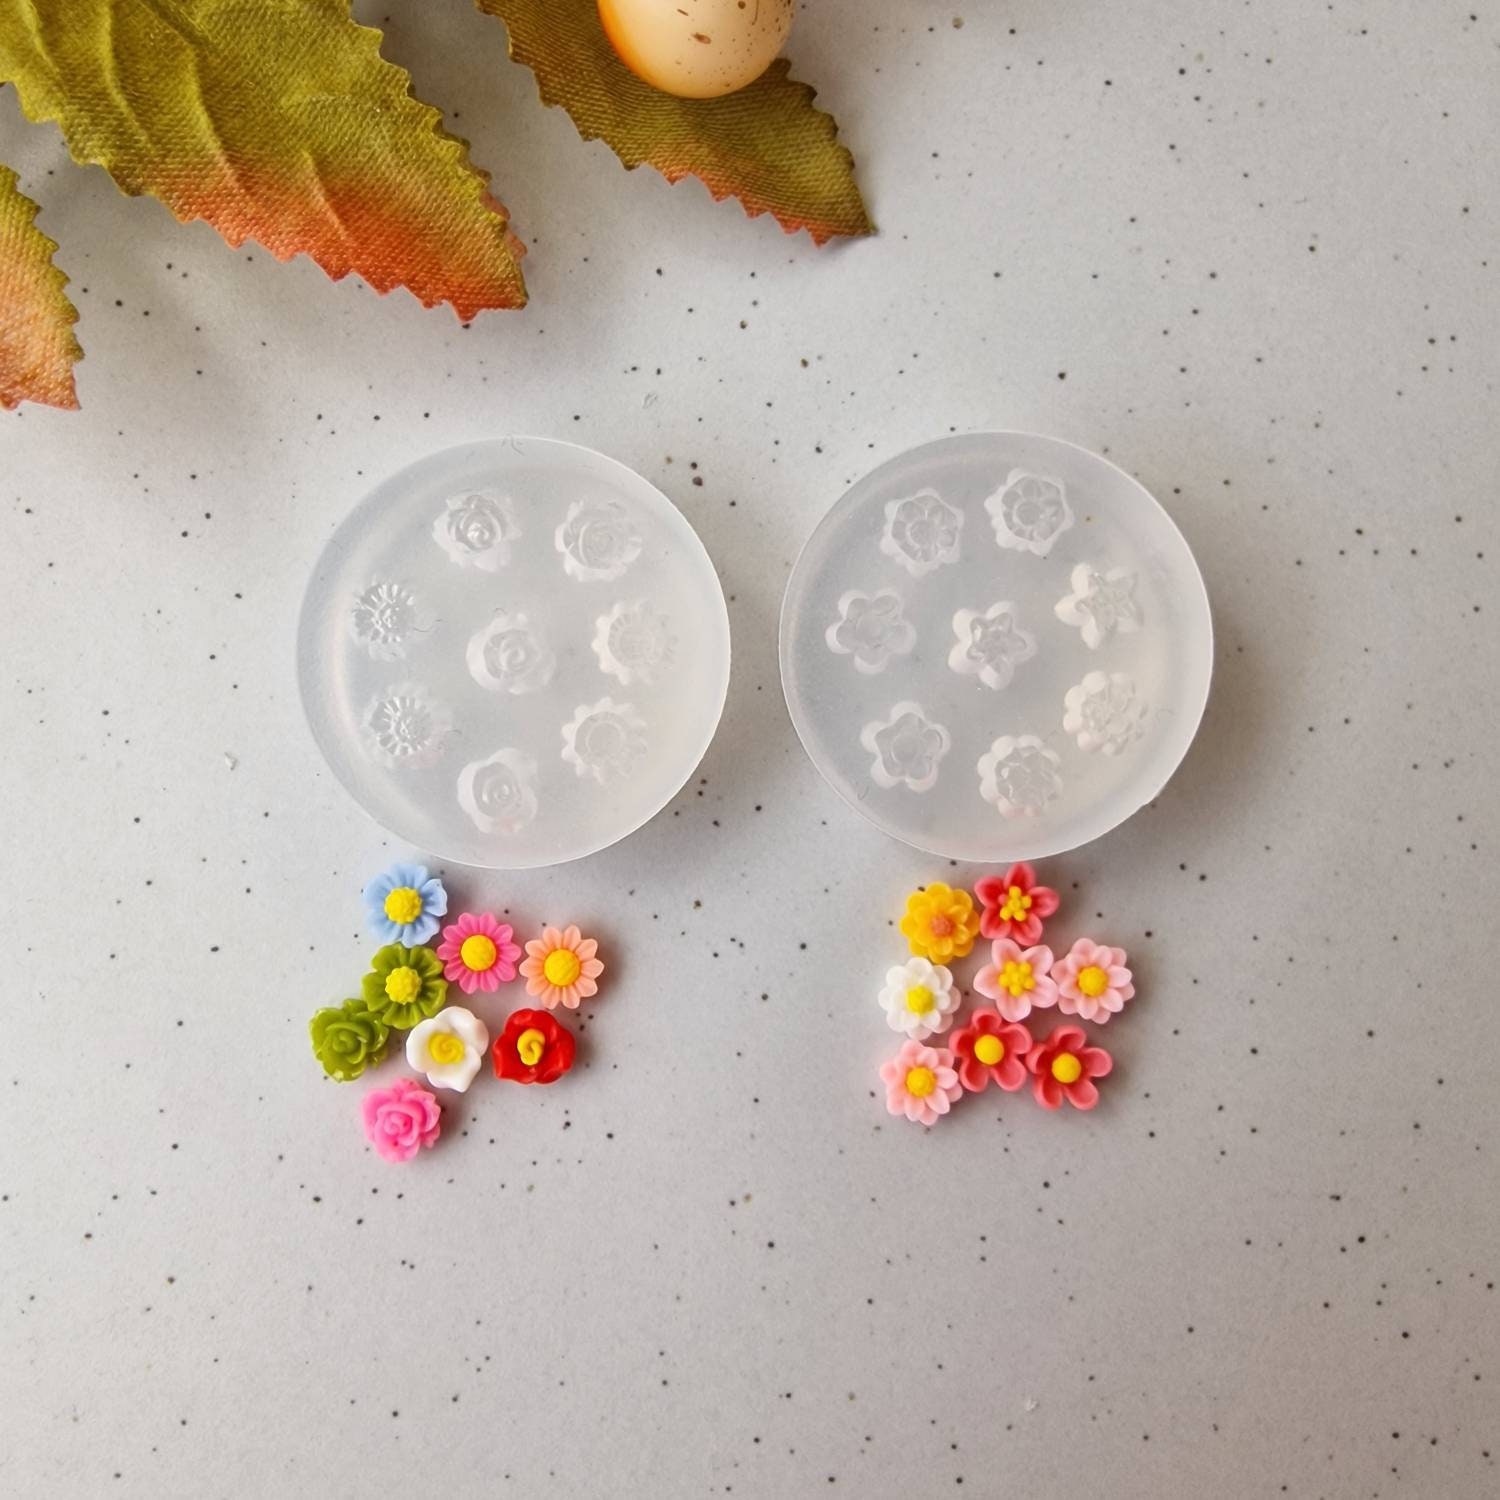 Silicone Mold Mini Flores - Mini Flowers - Collection Angellartes – Anne's  Arts Crafts